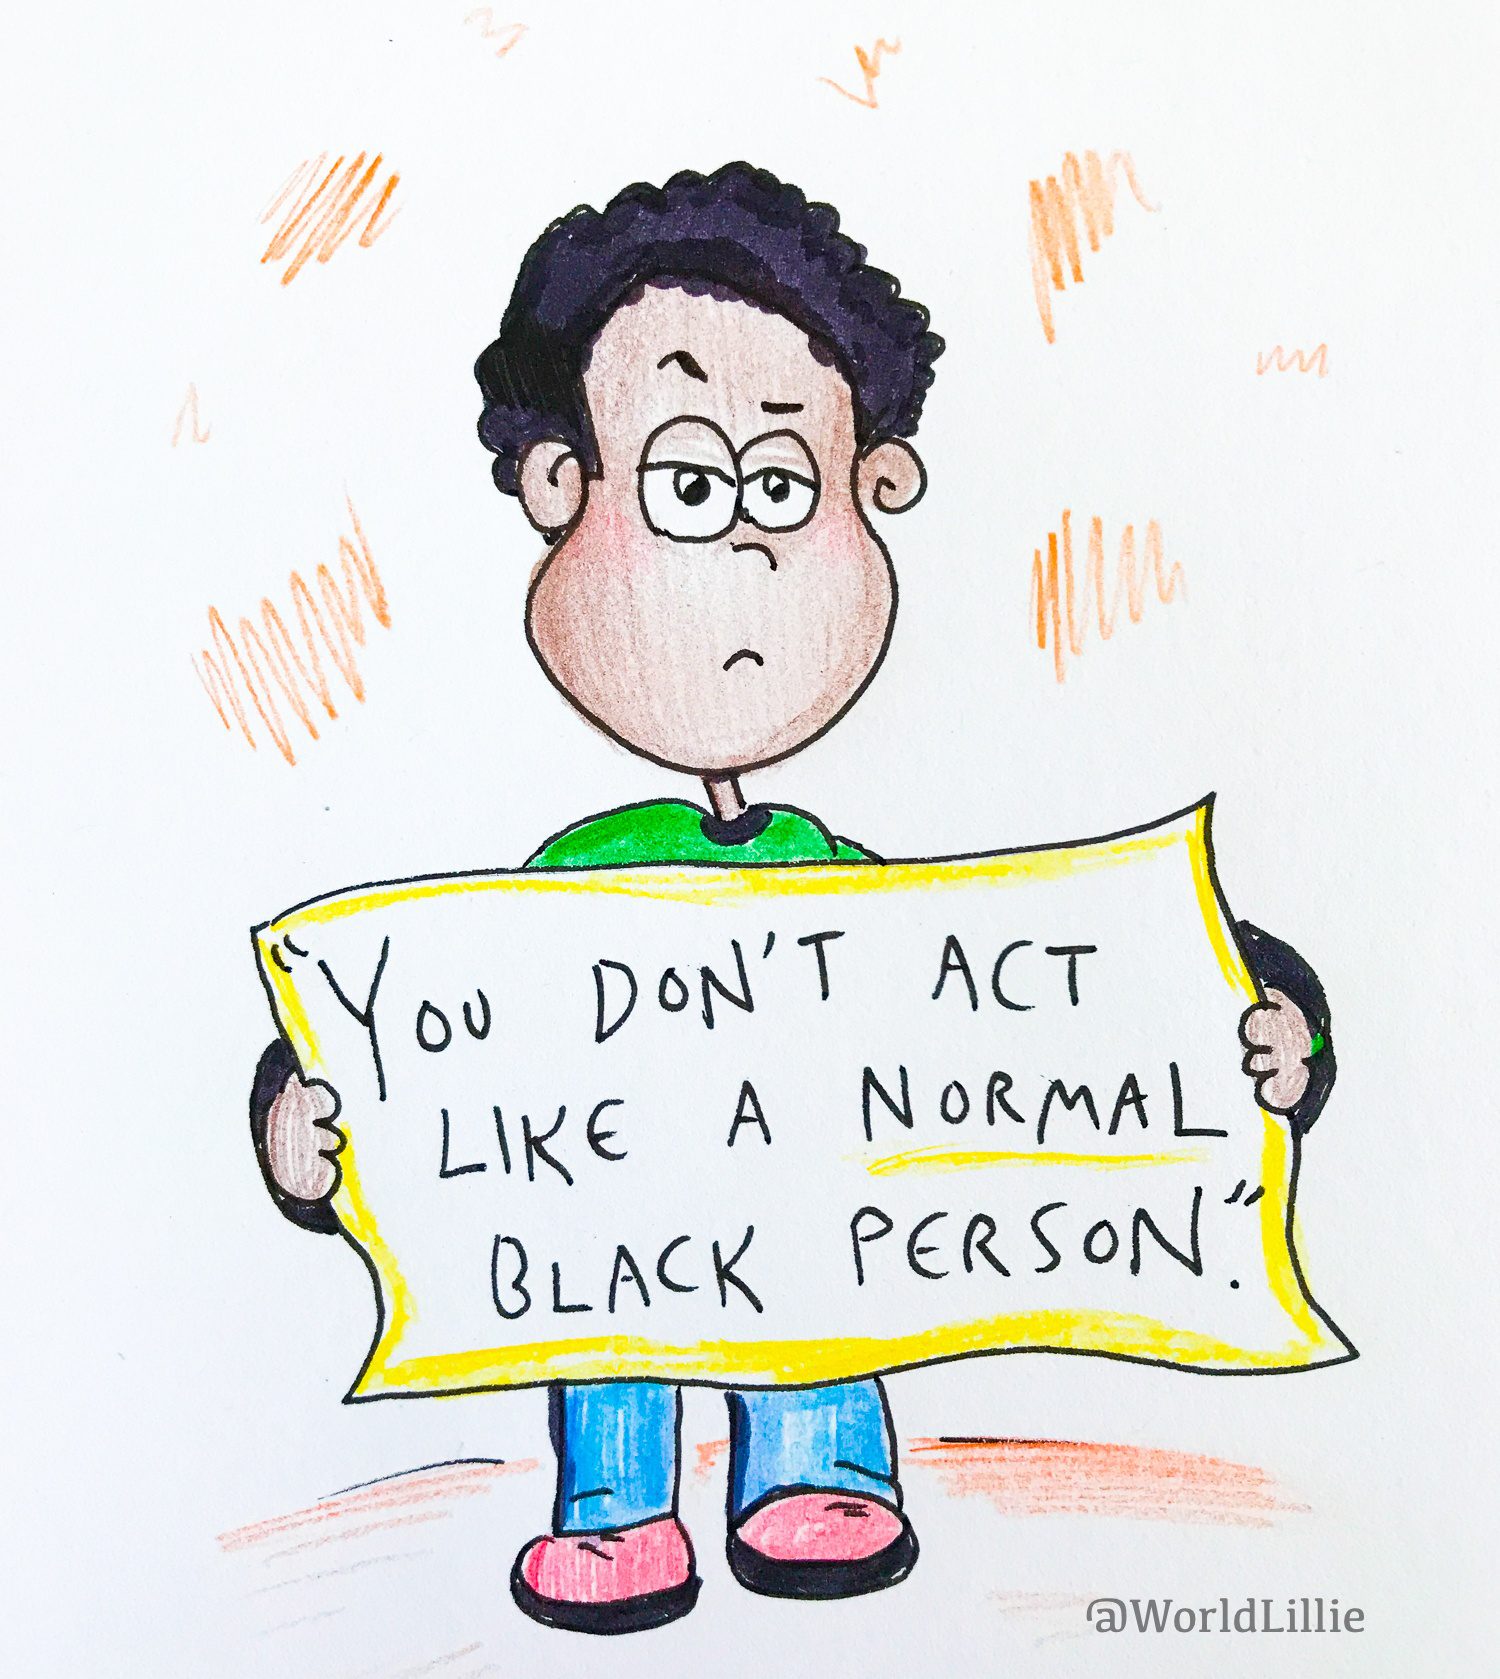 Microaggressions: You don't act like a normal Black person"